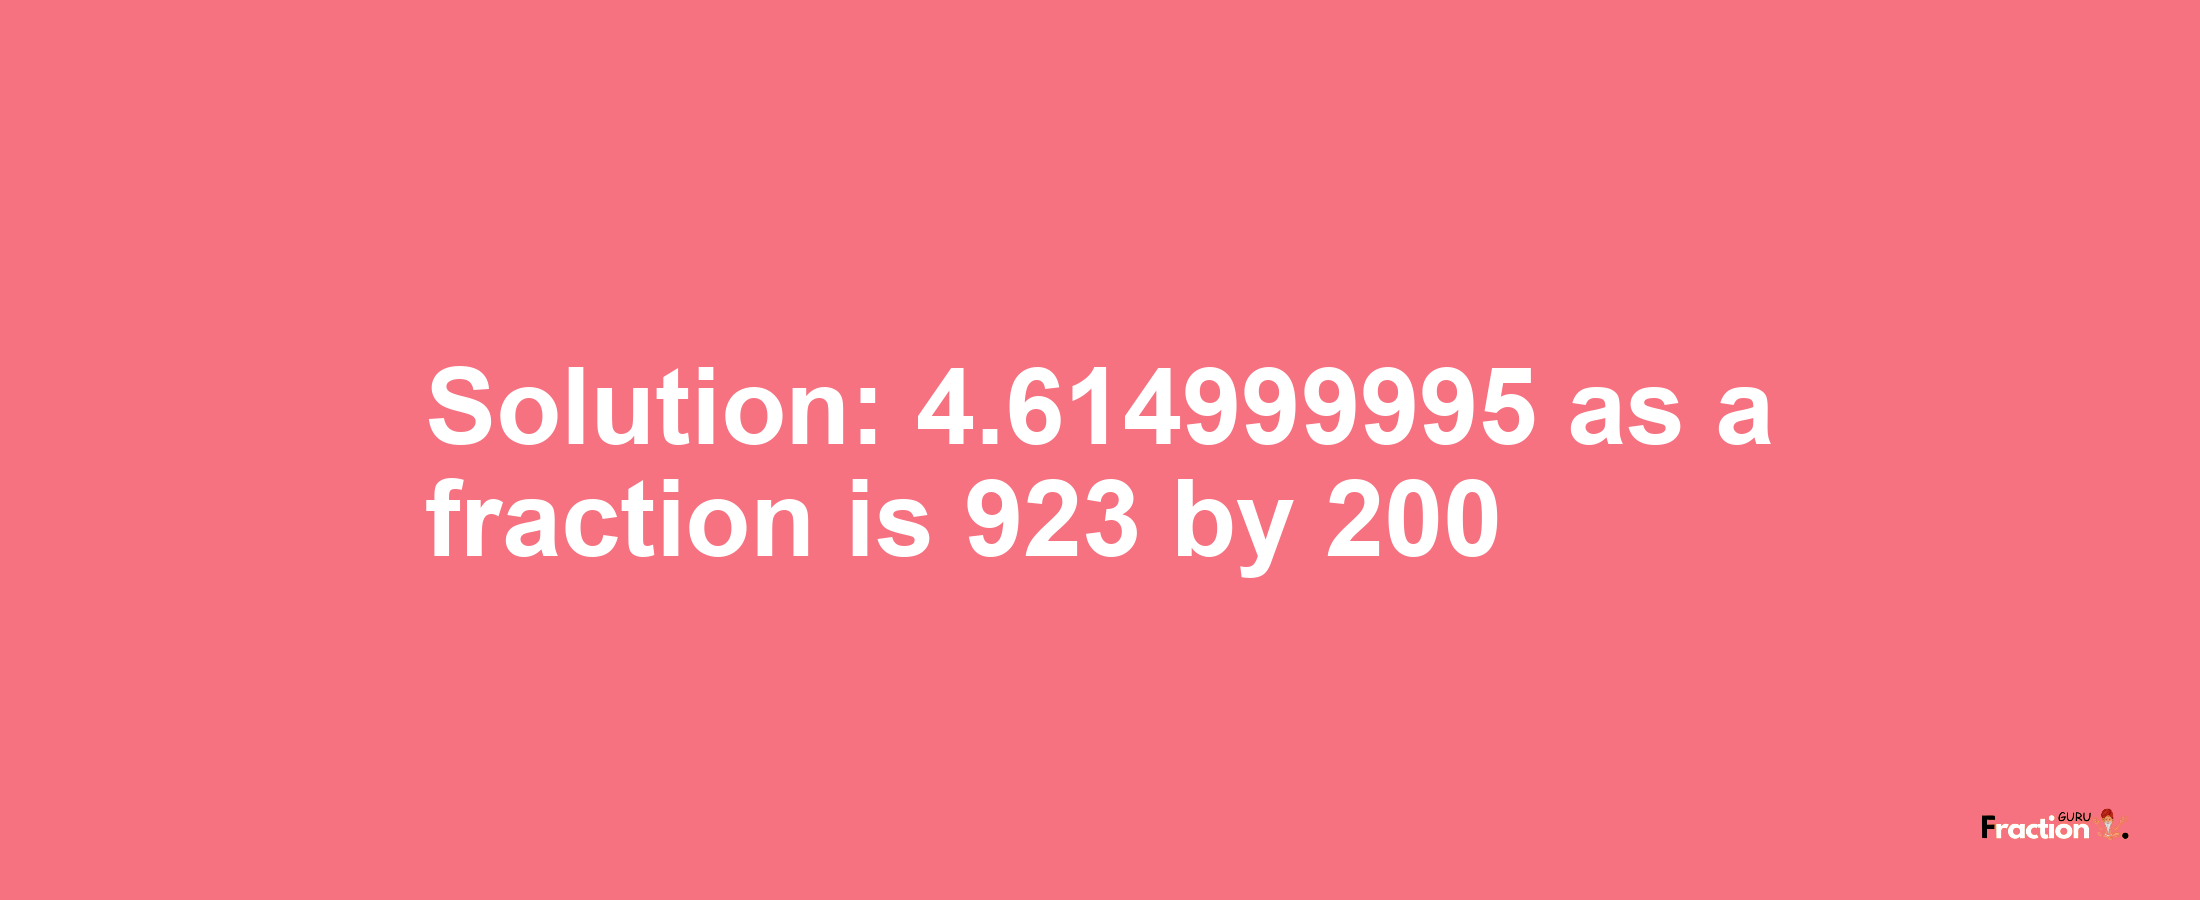 Solution:4.614999995 as a fraction is 923/200